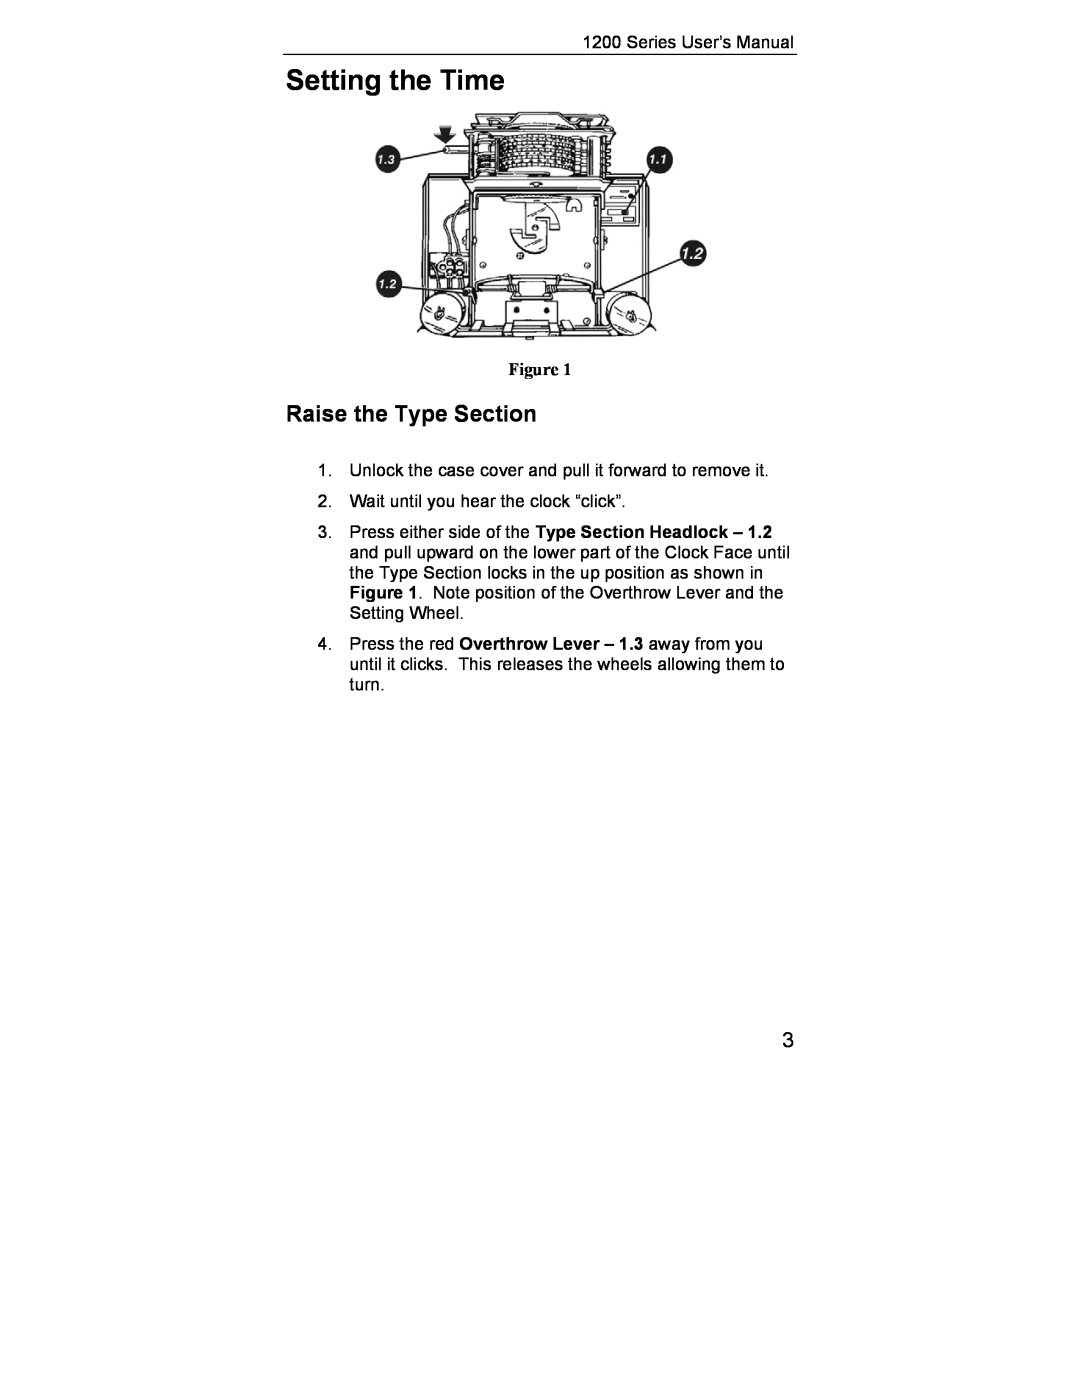 Lathem 1200 Series user manual Setting the Time, Raise the Type Section 